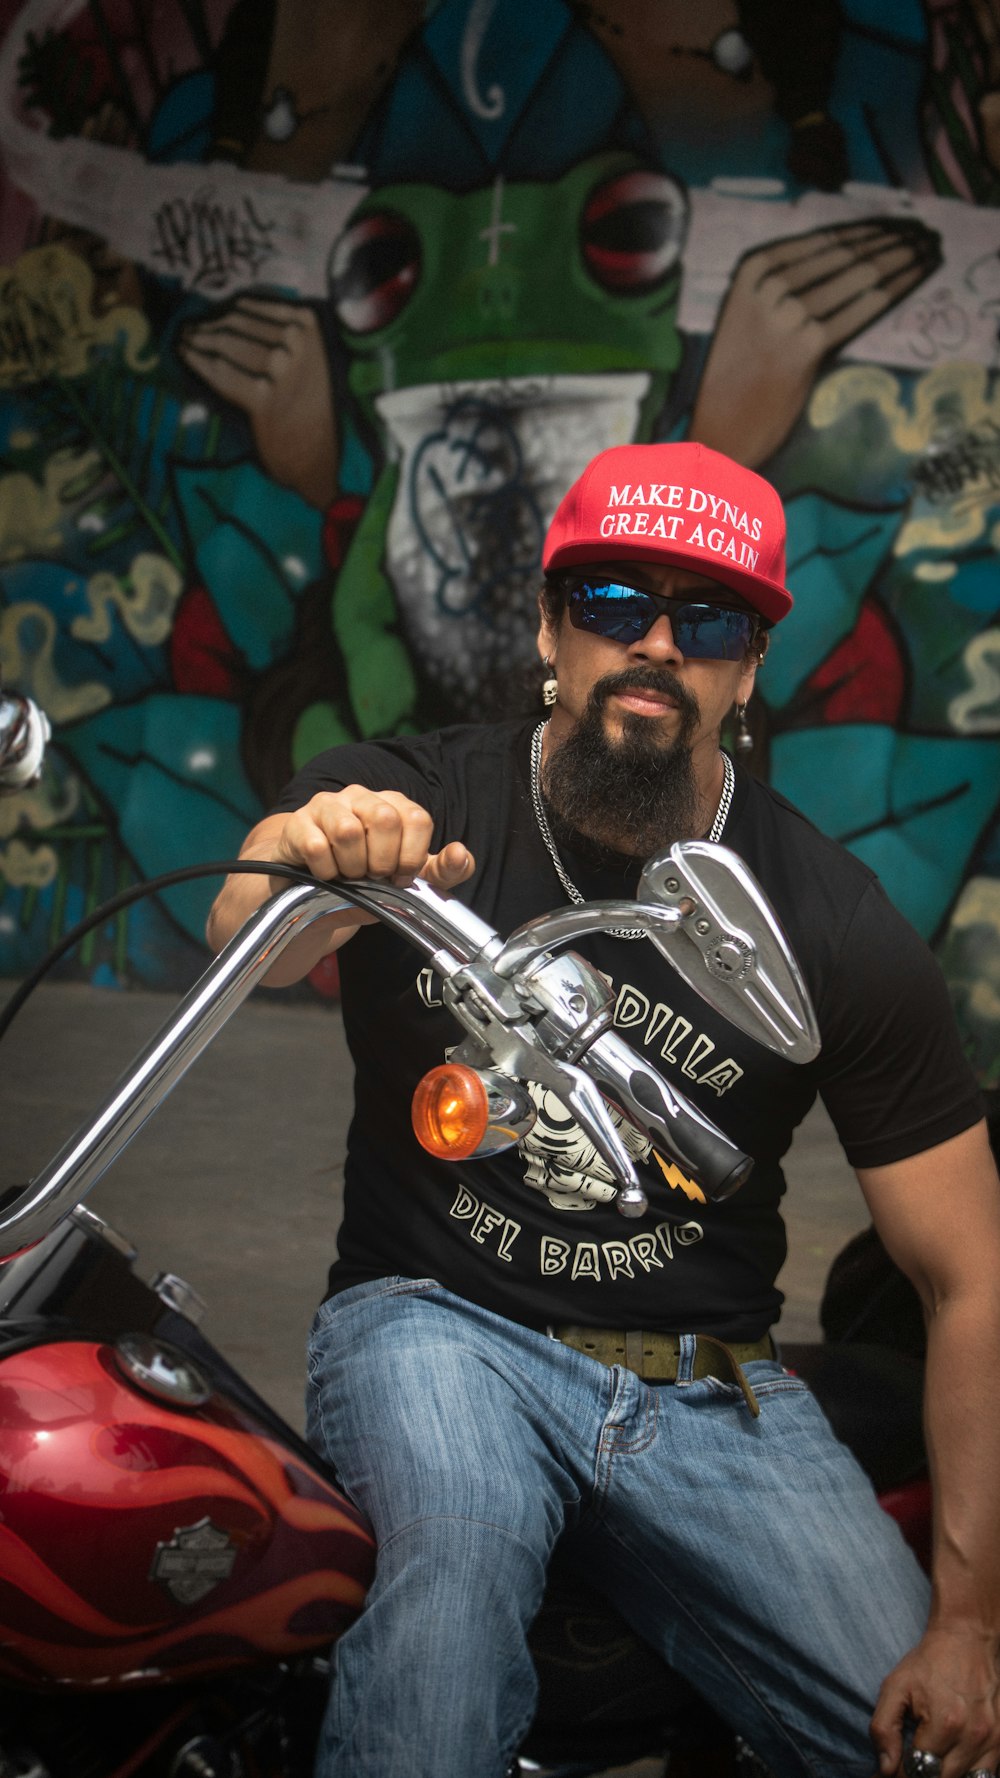 a man sitting on a motorcycle wearing a red hat